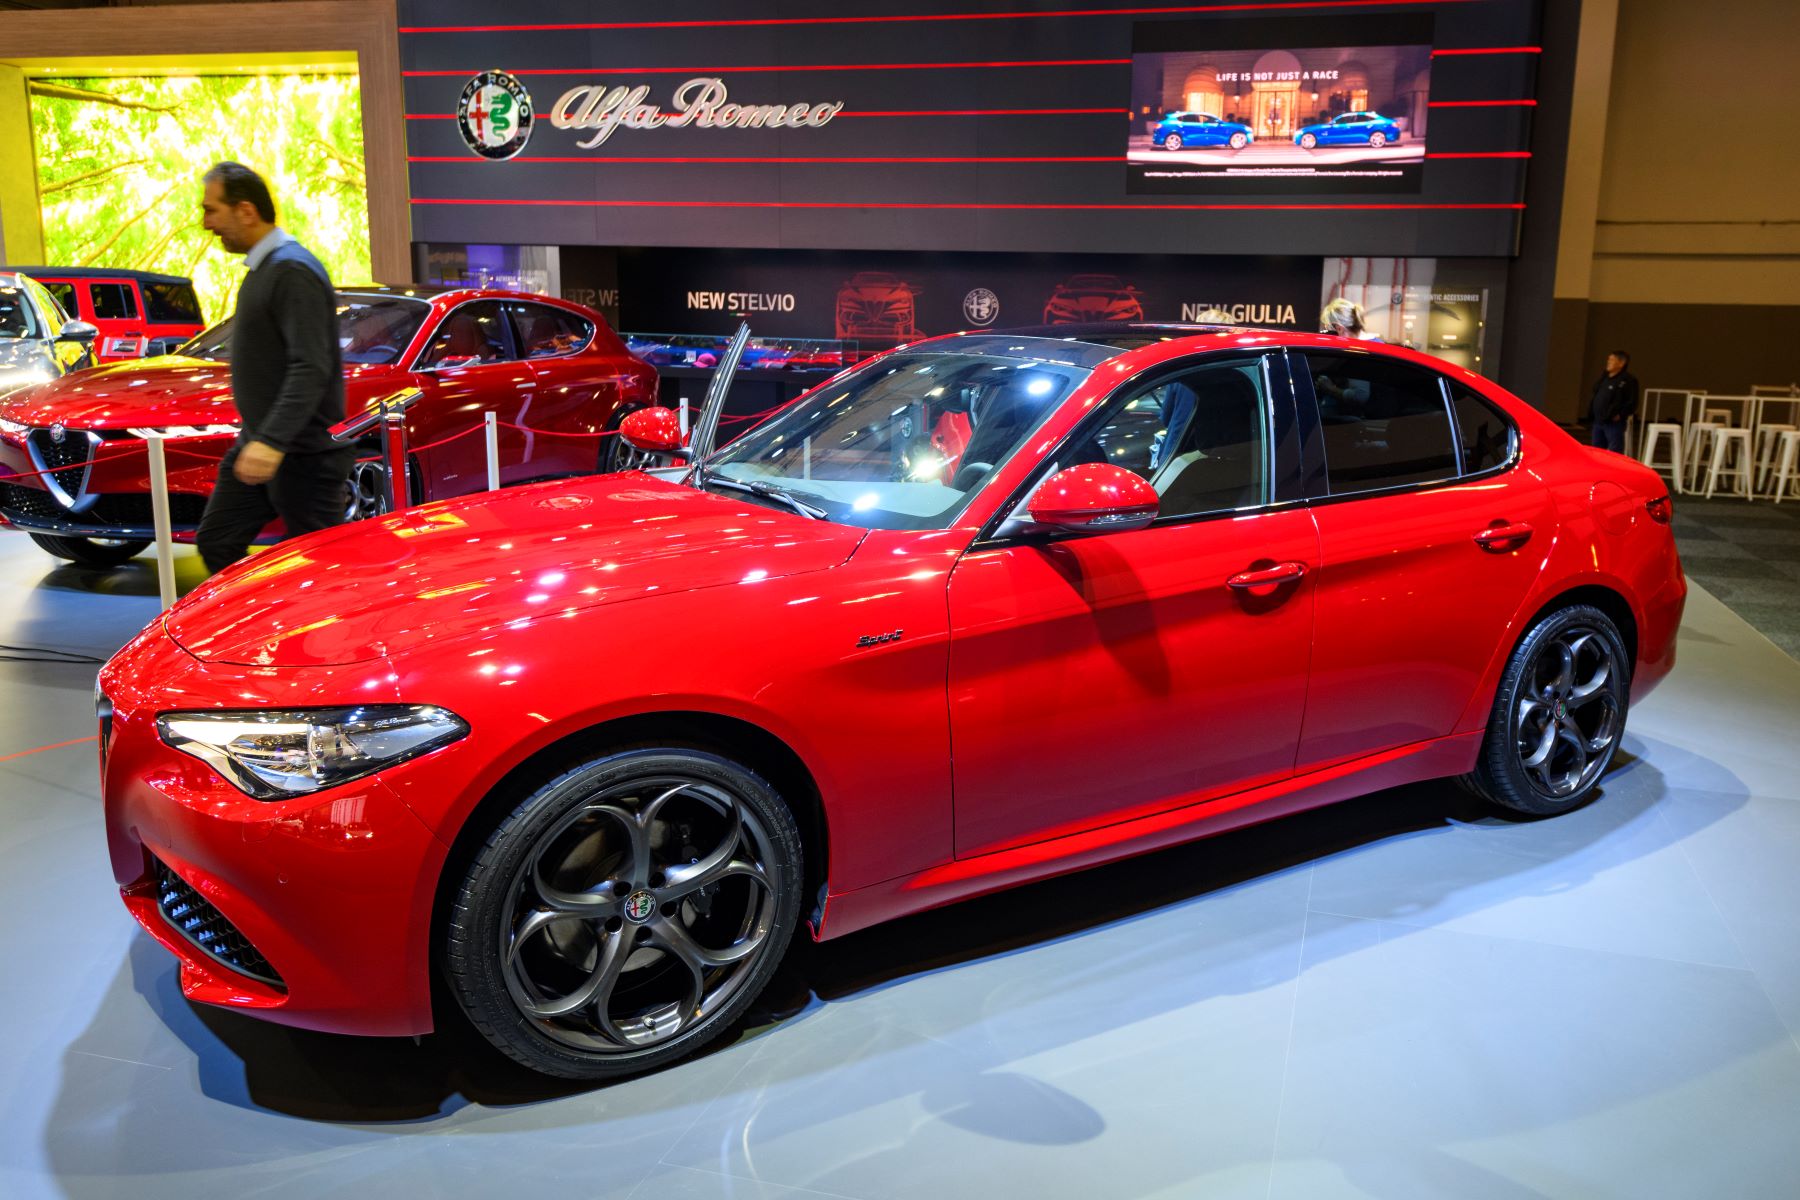 The Alfa Romeo Giulia luxury sports sedan in red at the Brussels Expo in Belgium